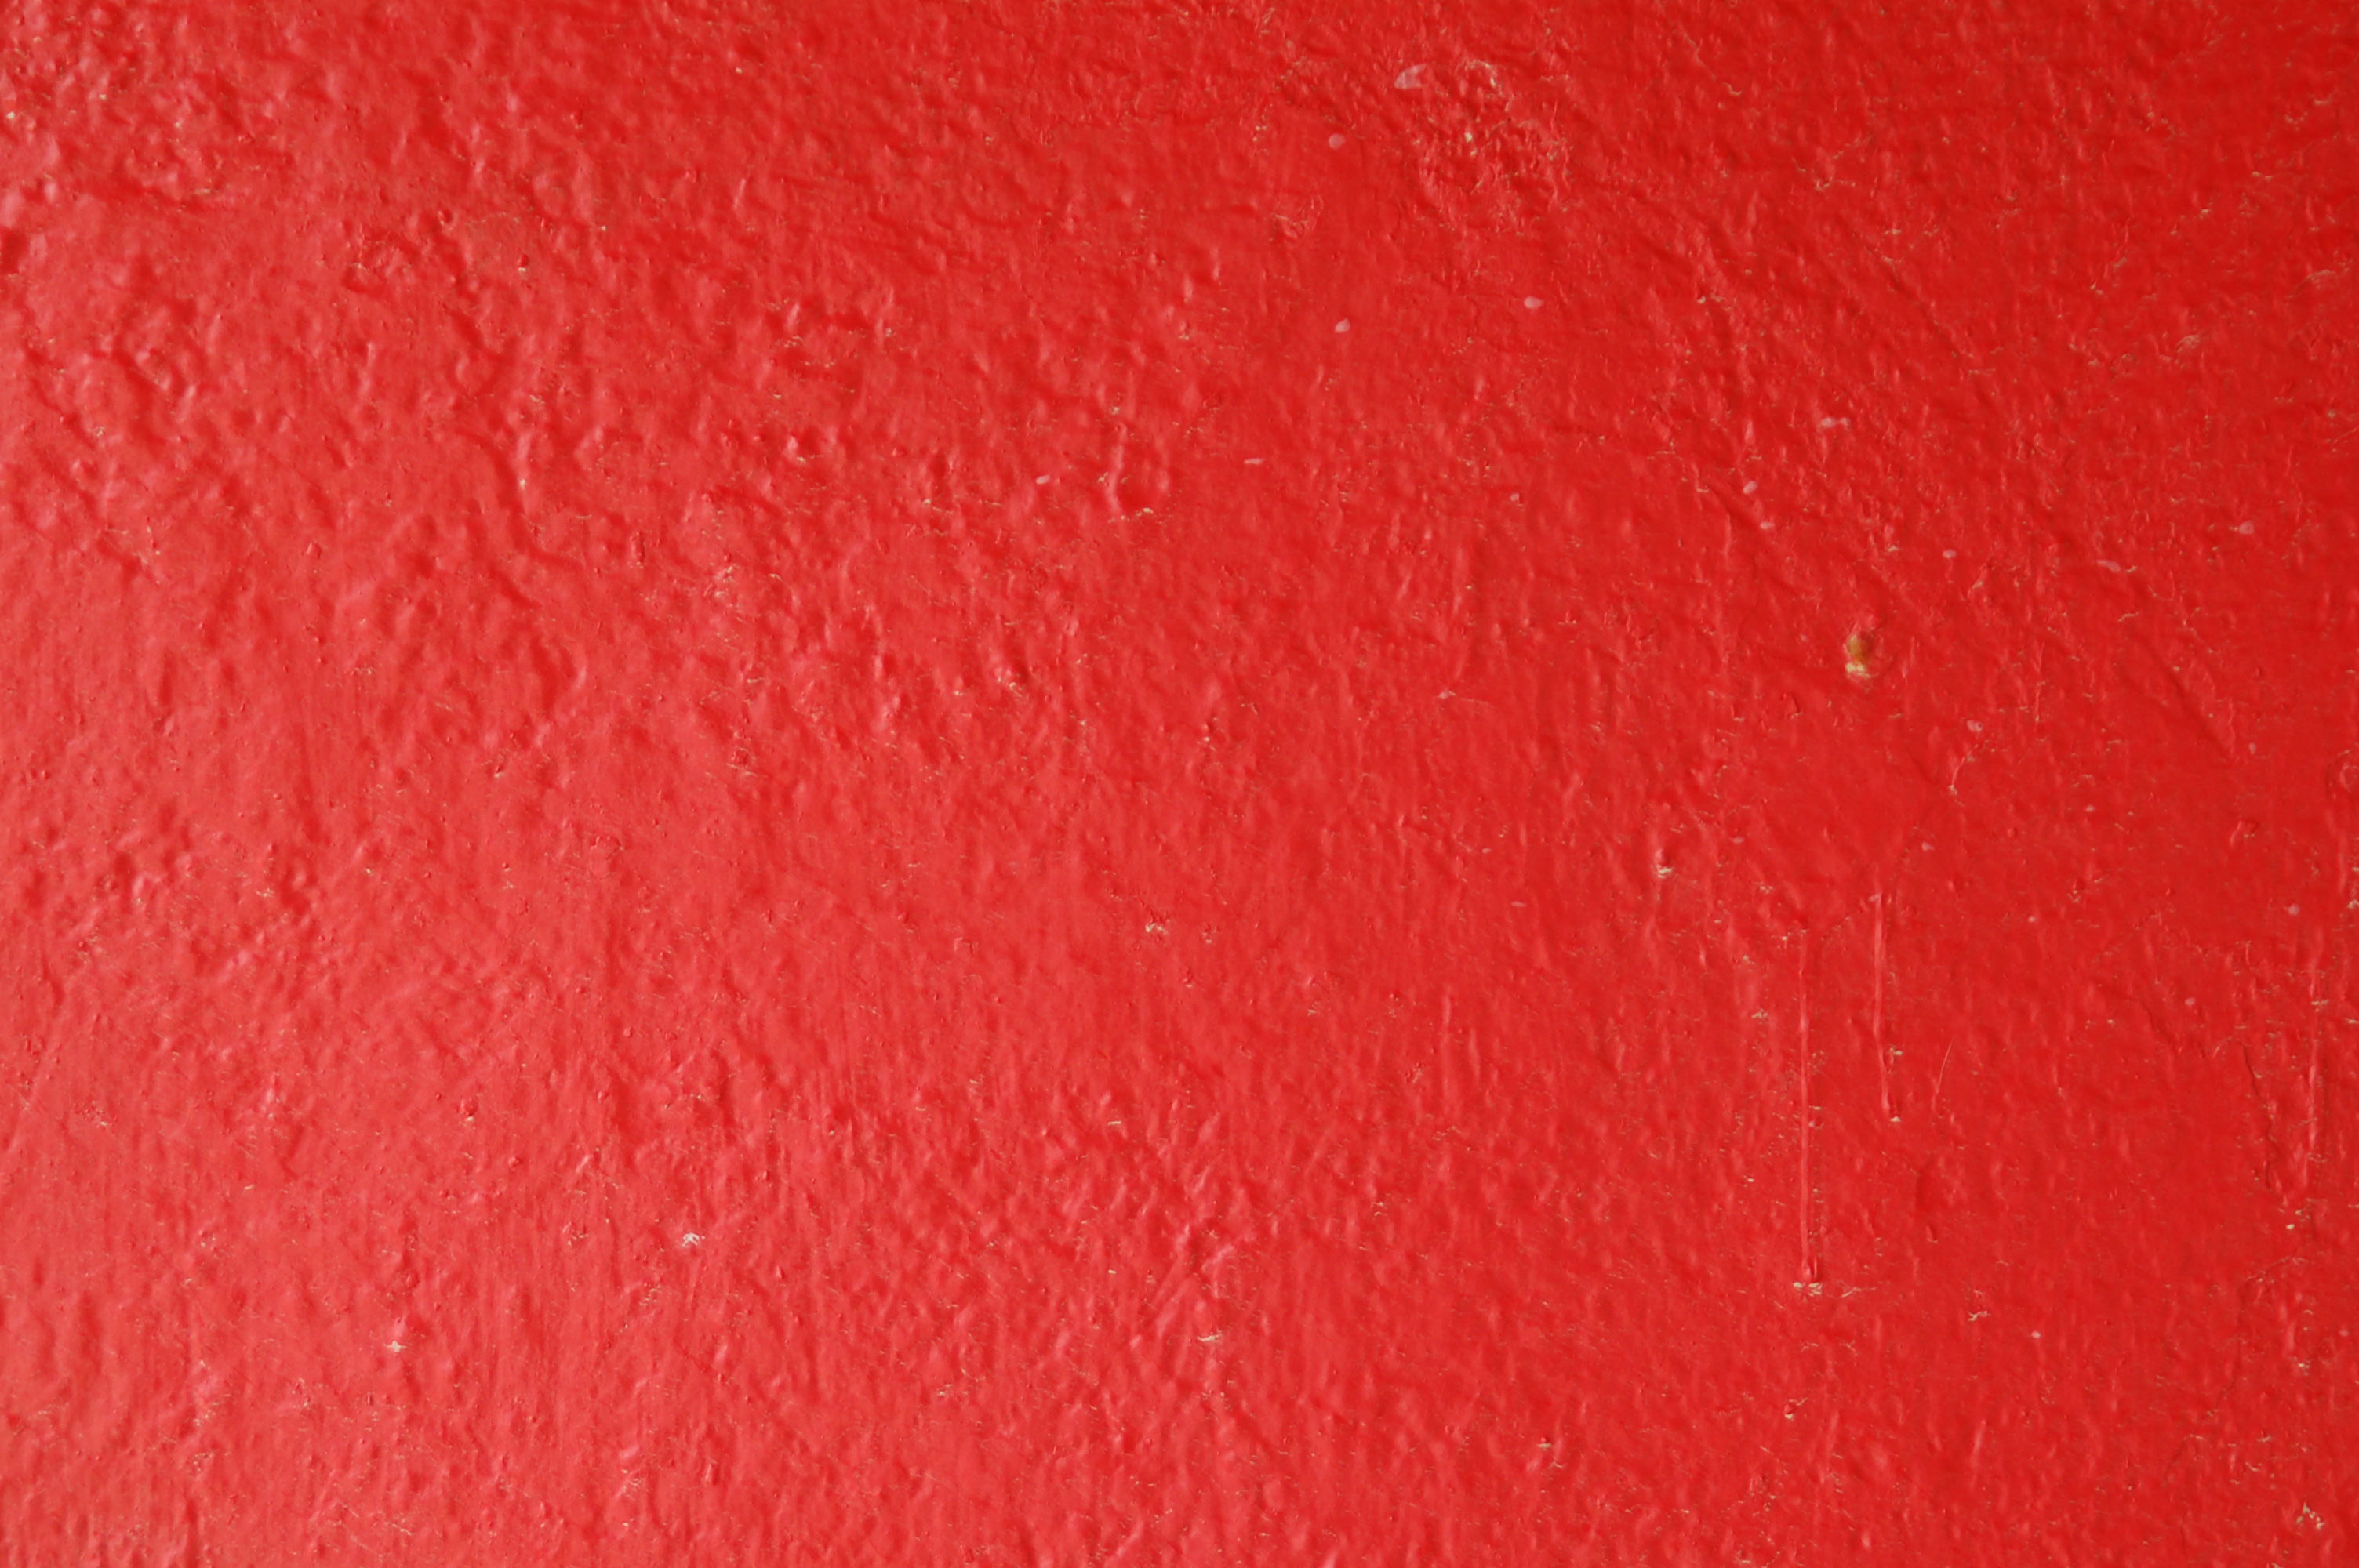 Red painted wall texture download free textures